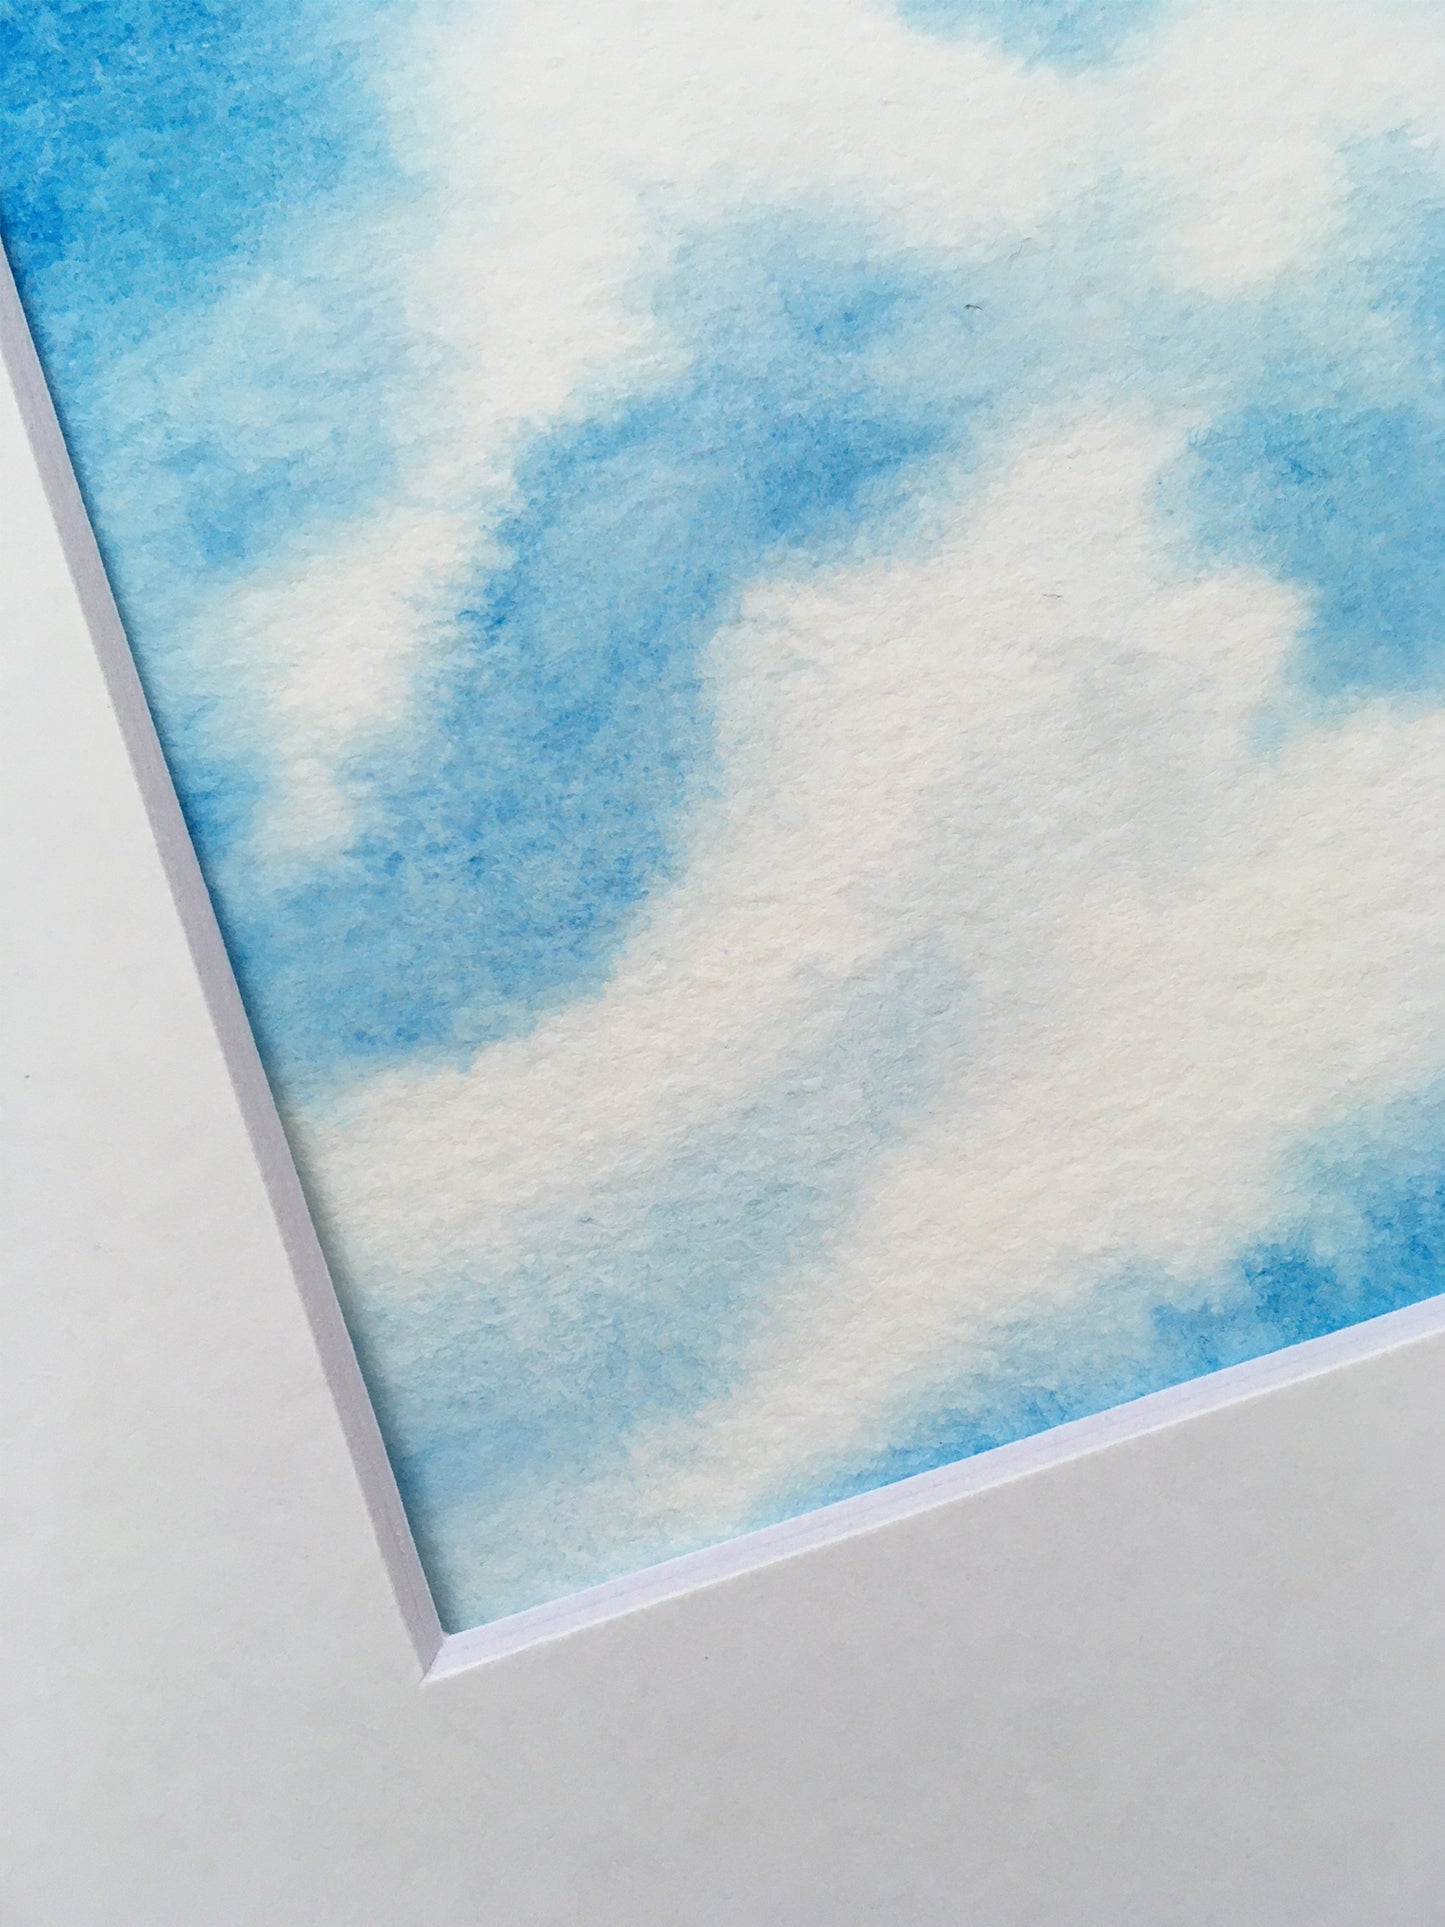 Look Up At The Clouds | No. 1 - Original Watercolor Painting